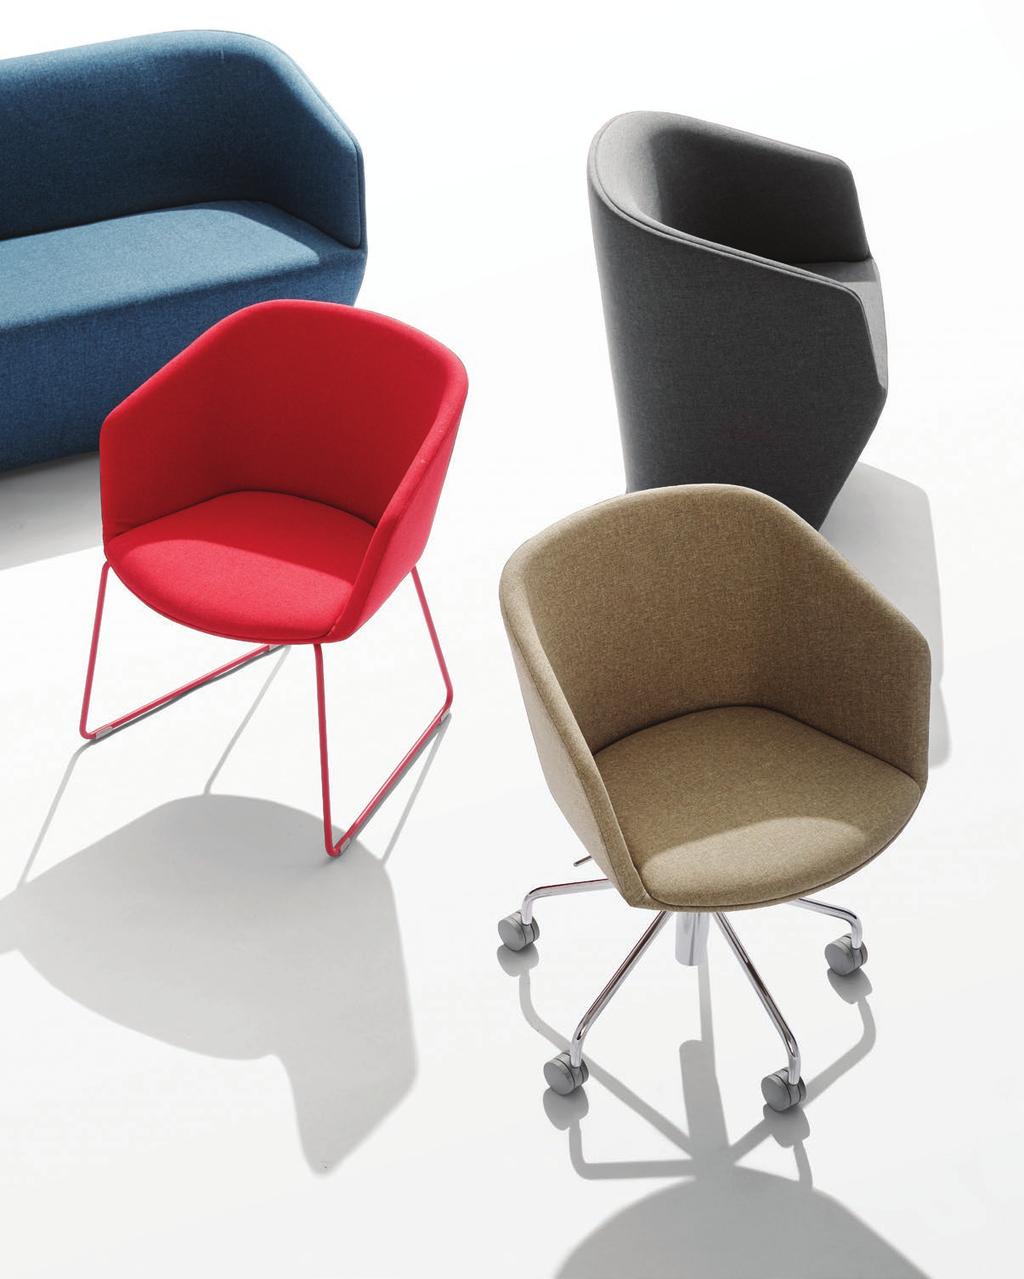 1 2 Pitch Collection 3 4 Simple + Streamlined Ideal for casual office seating, our Pitch Collection